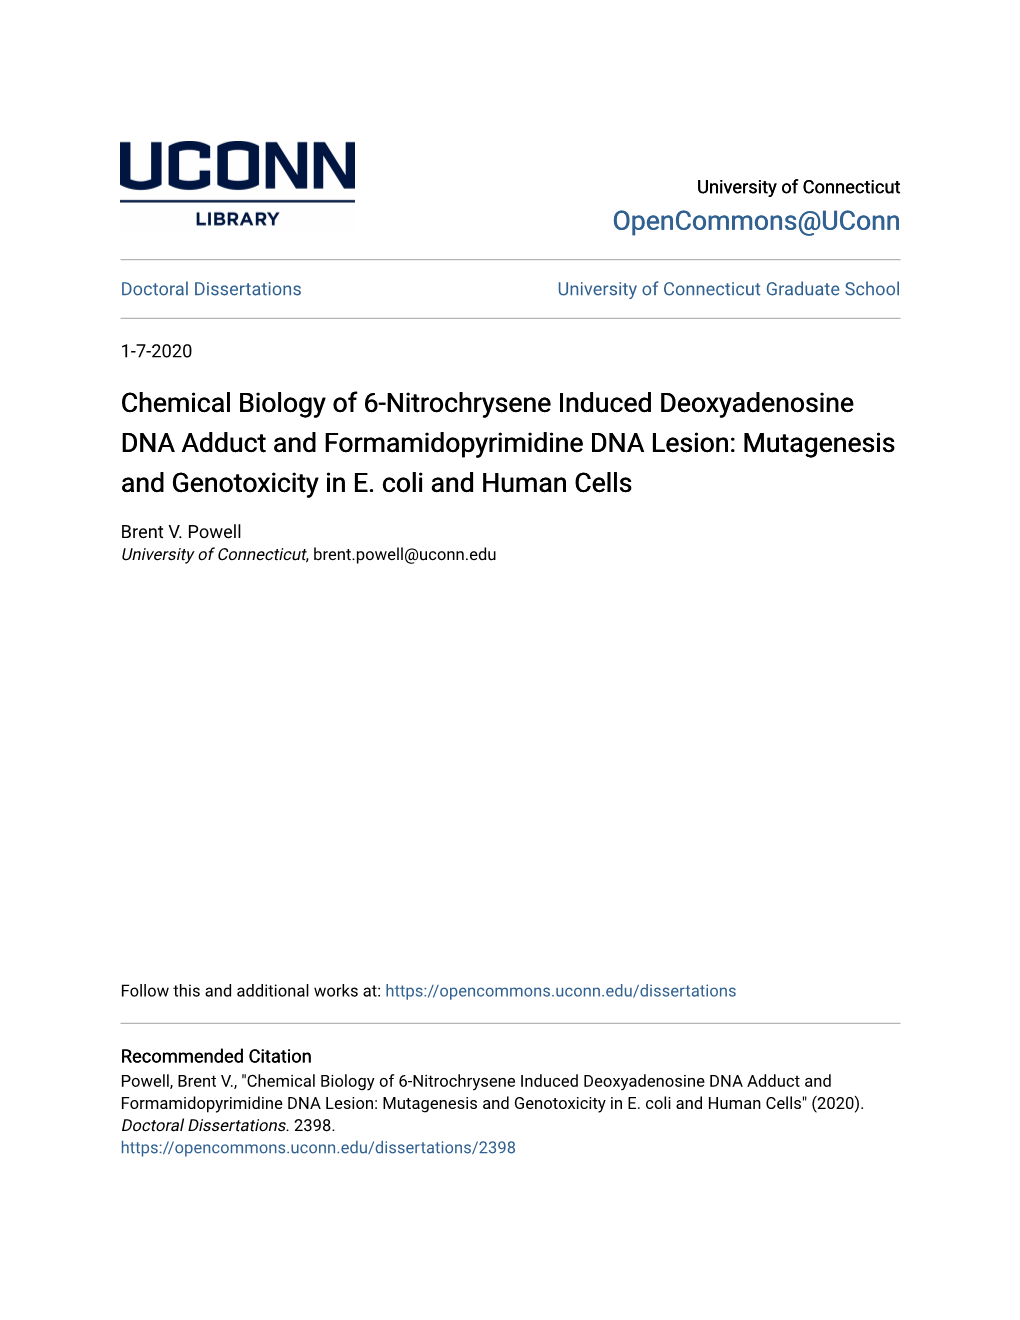 Chemical Biology of 6-Nitrochrysene Induced Deoxyadenosine DNA Adduct and Formamidopyrimidine DNA Lesion: Mutagenesis and Genotoxicity in E